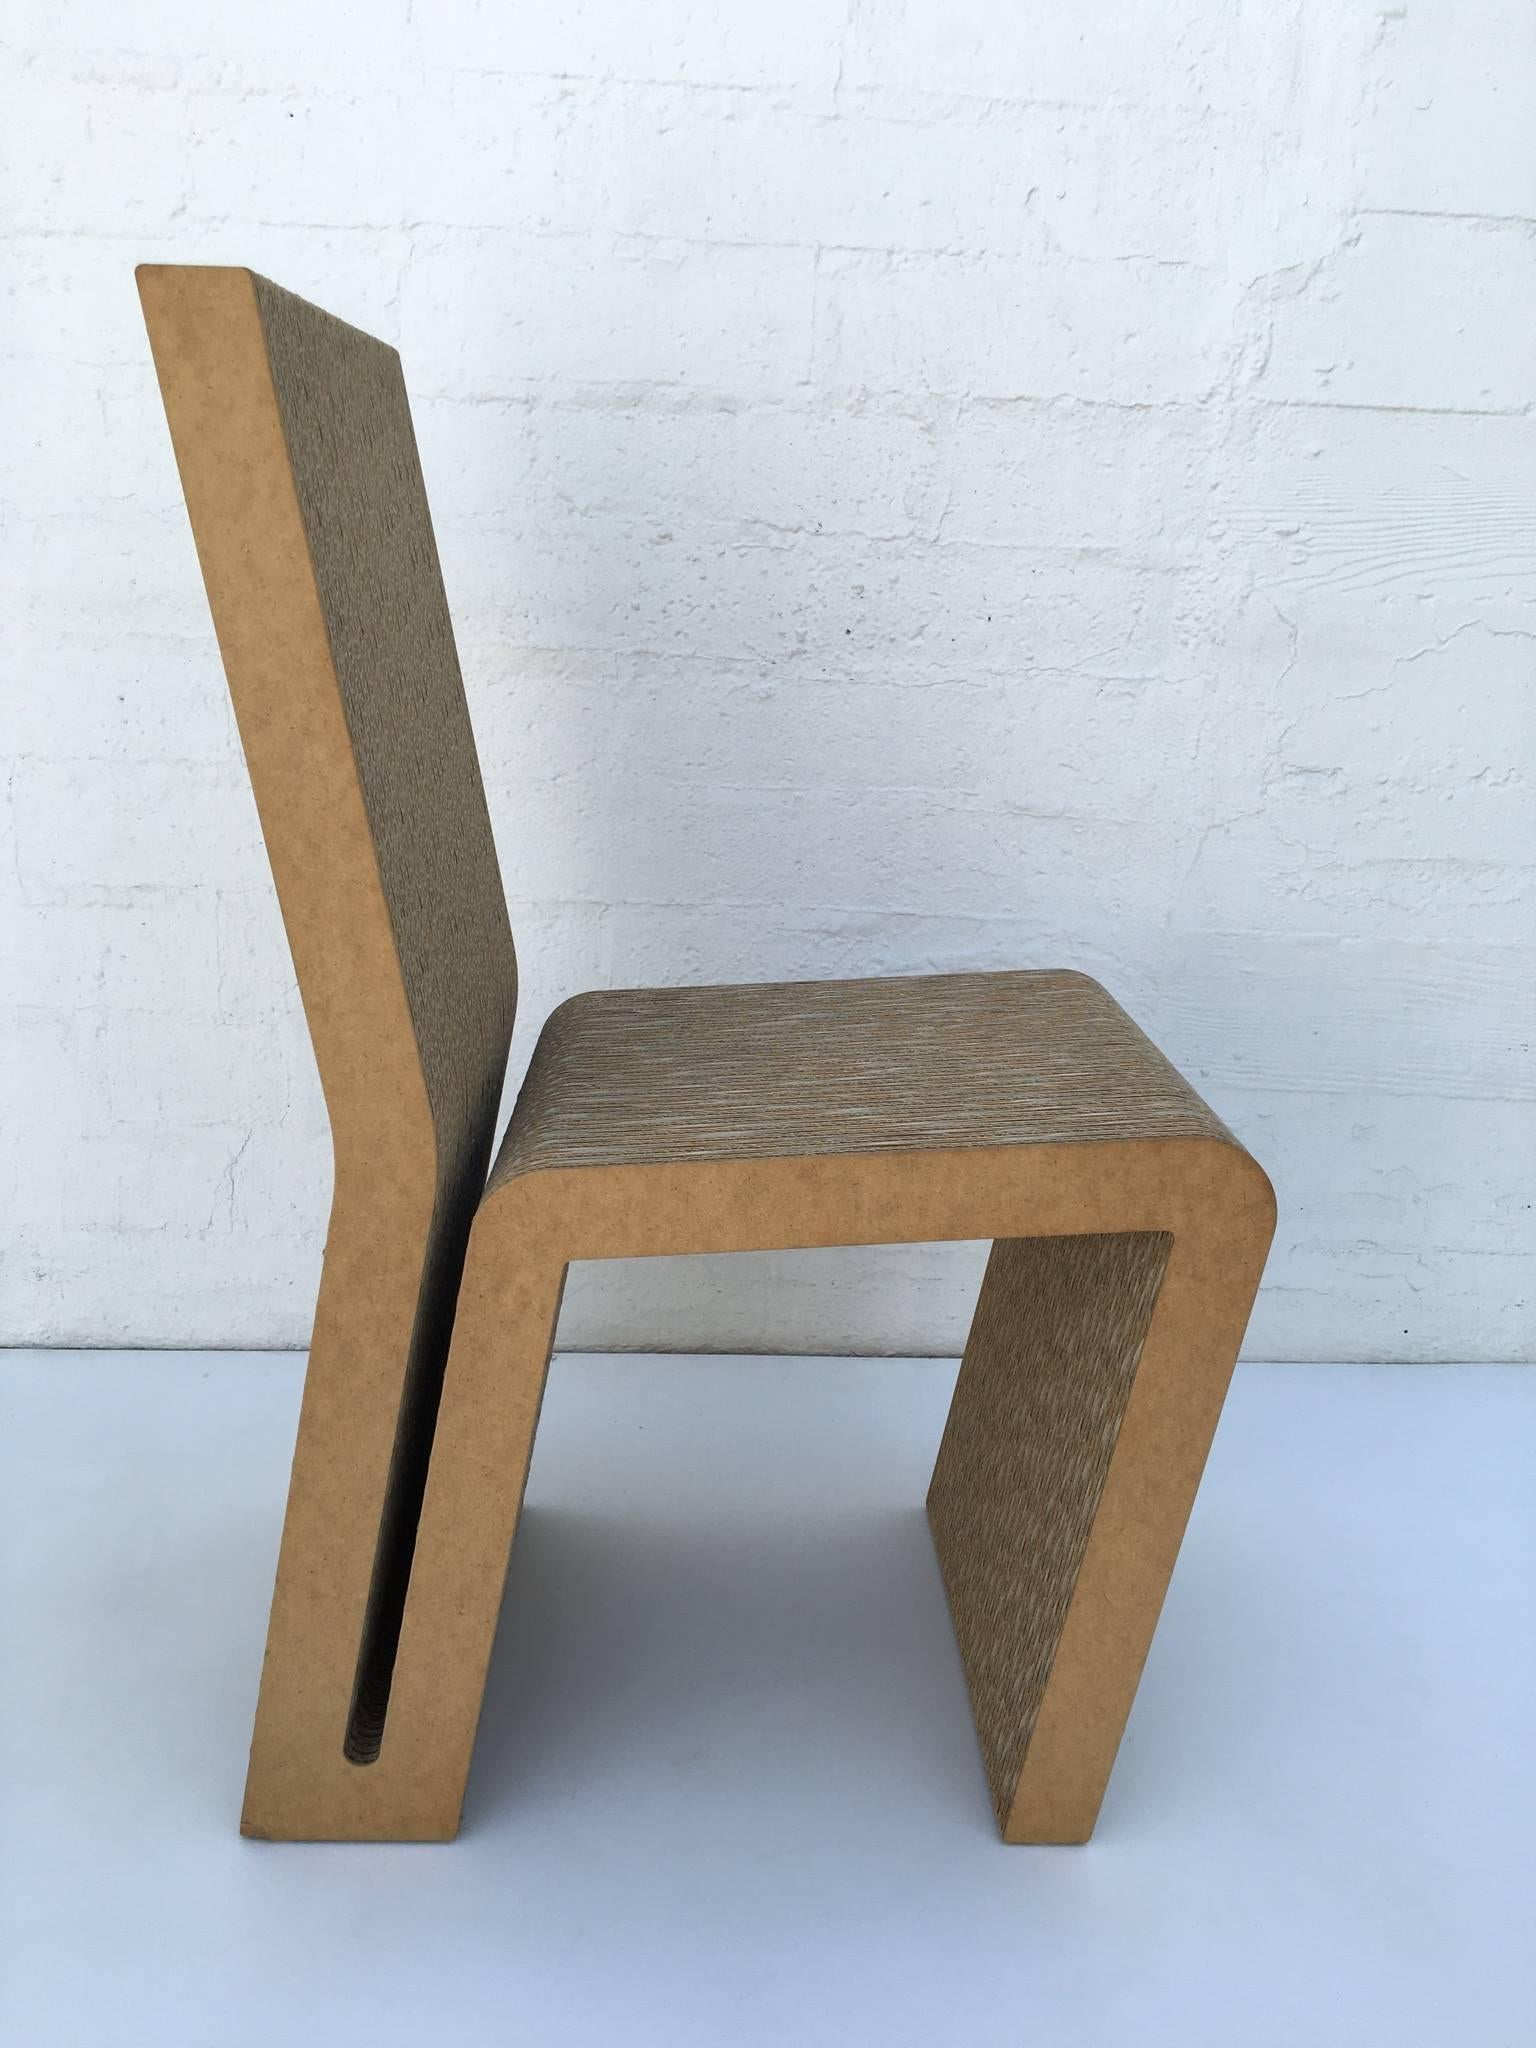 Iconic easy edges side chair. Designed by Frank Gehry for Vitra in the 1980s.
The chair is constructed of cardboard and Masonite.
The chair is in good condition with a small piece of Masonite missing down on back leg. See